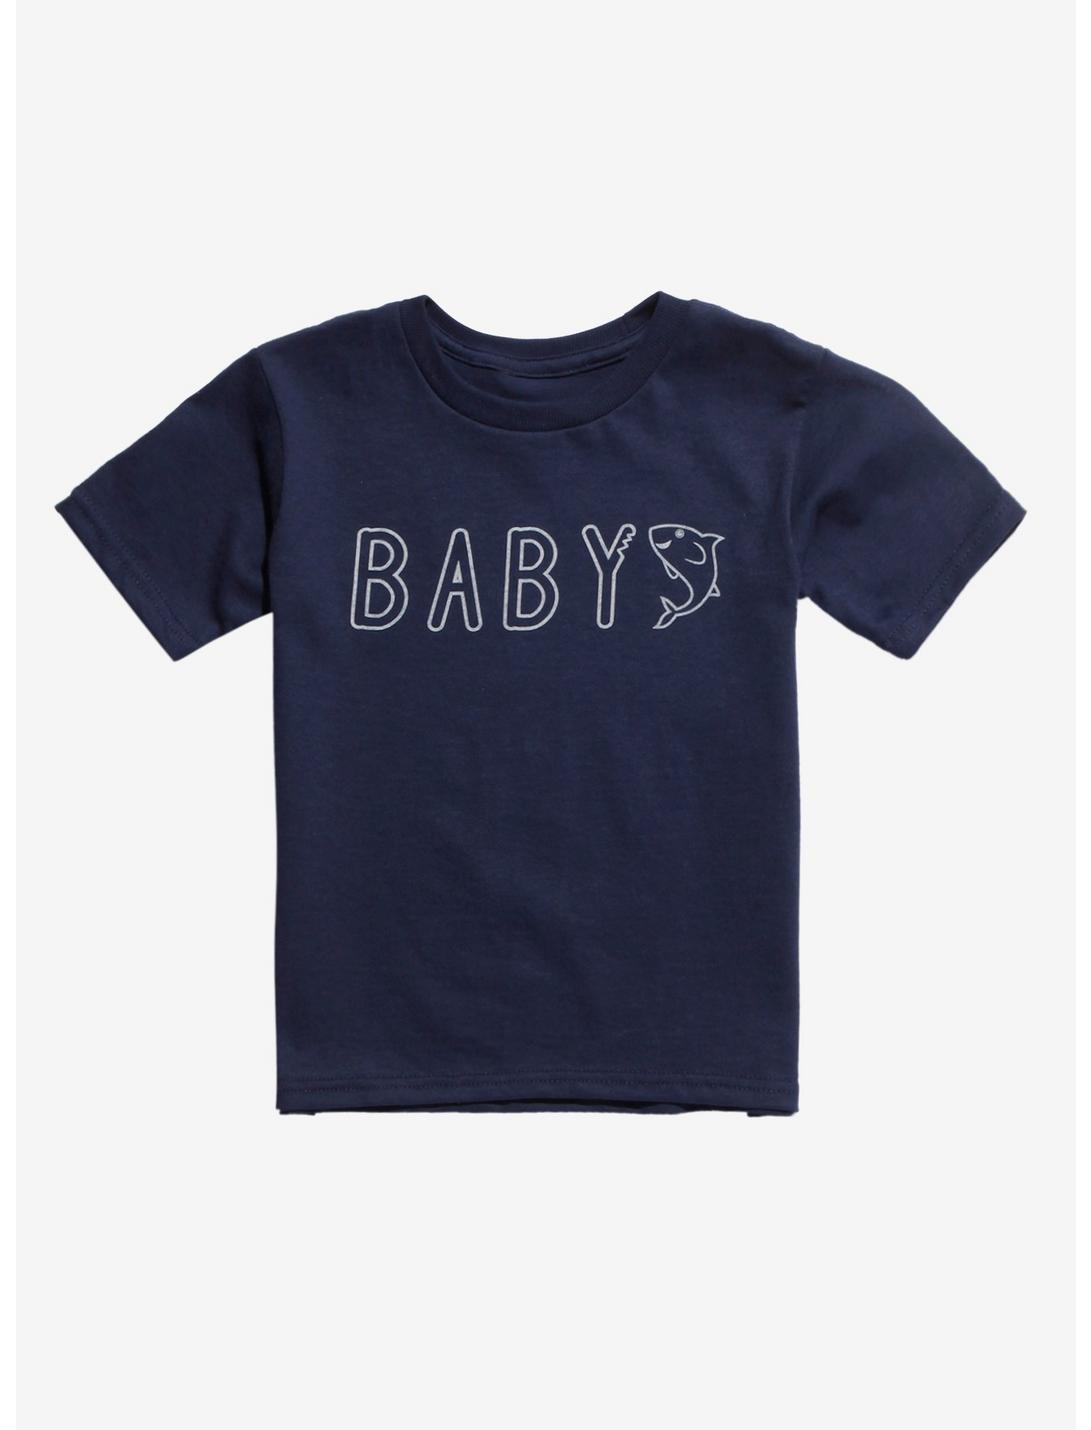 Baby Shark Toddler T-Shirt - BoxLunch Exclusive, NAVY, hi-res